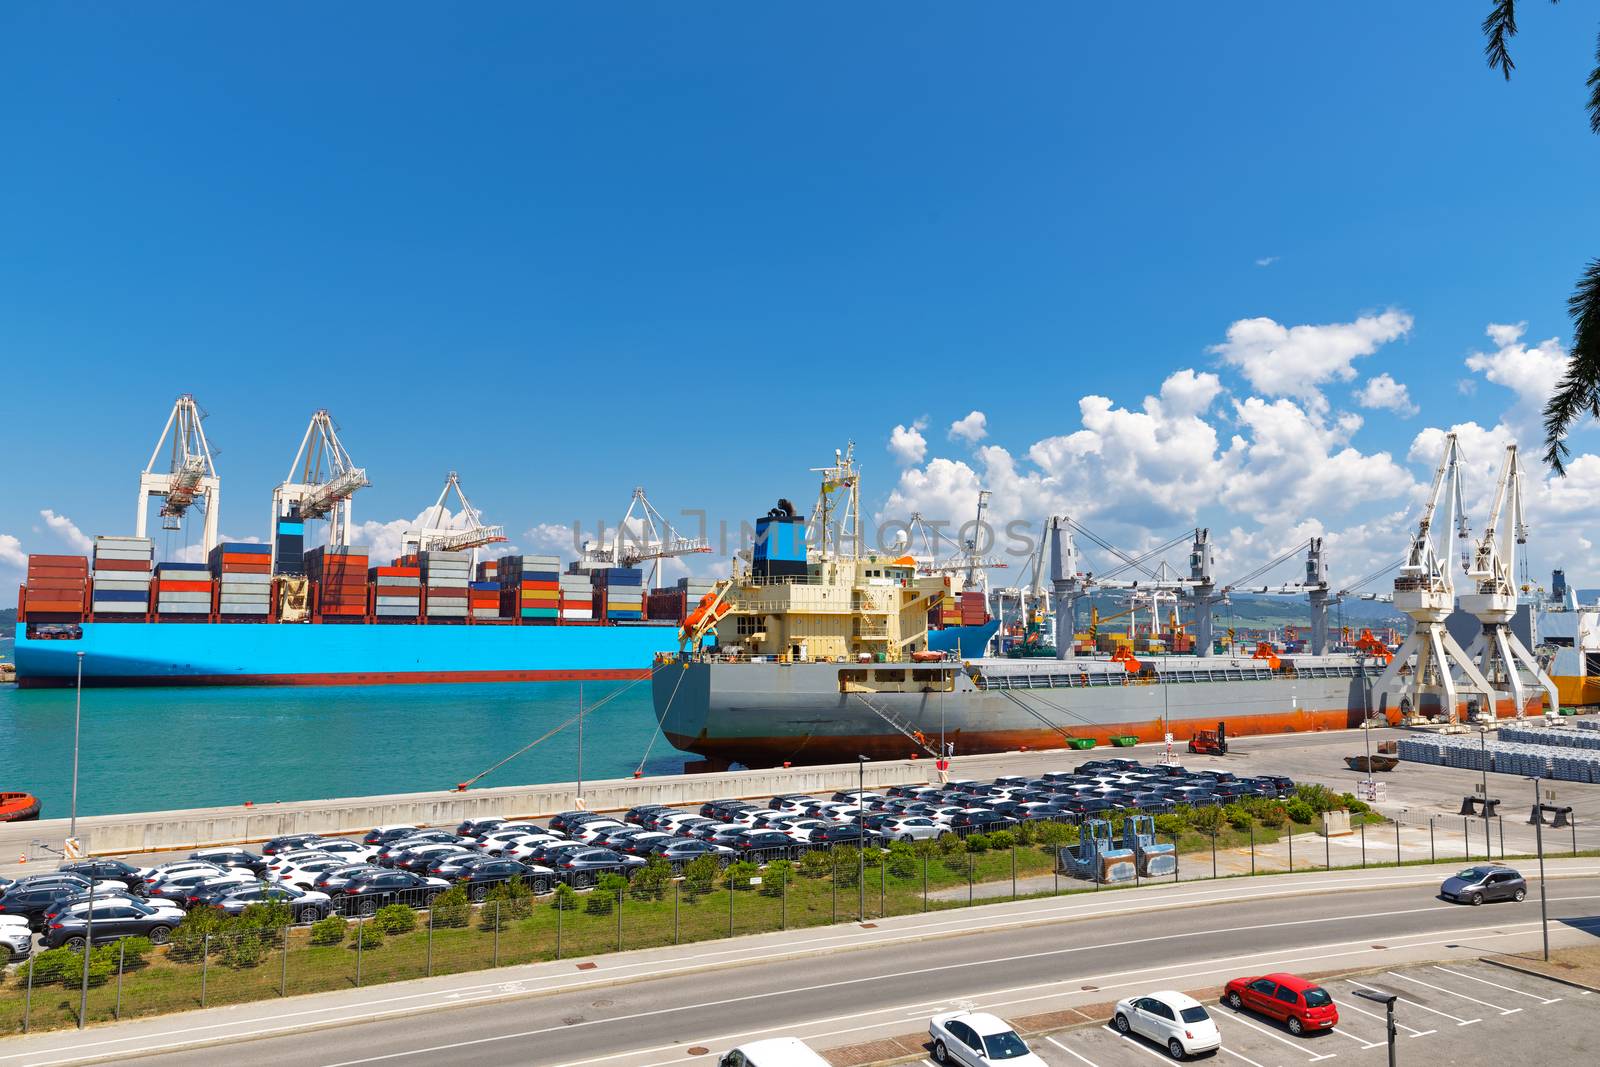 Large industrial port with many cranes and cargo containers